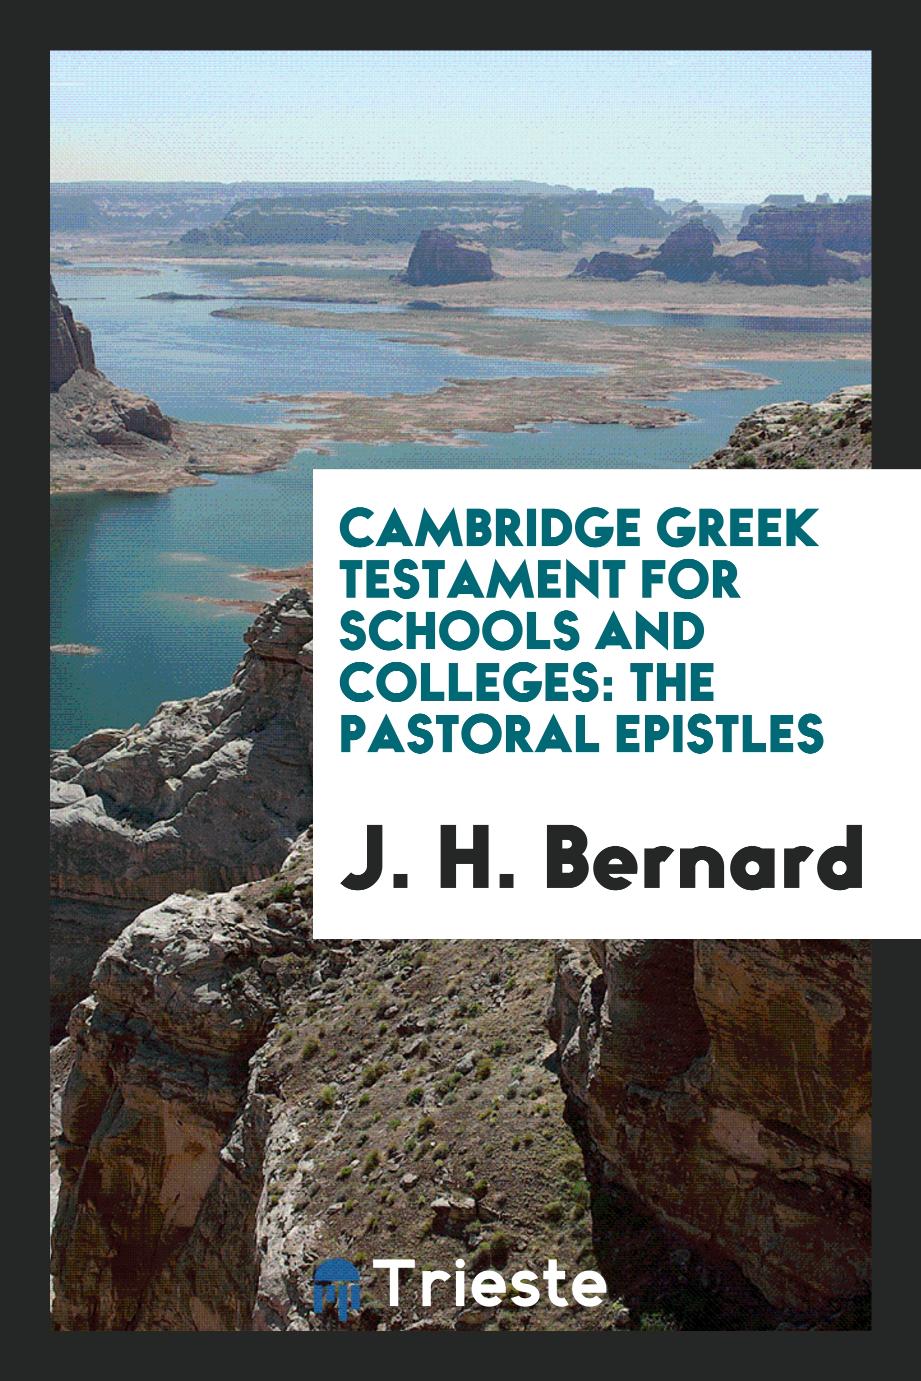 Cambridge Greek Testament for Schools and Colleges: The Pastoral Epistles